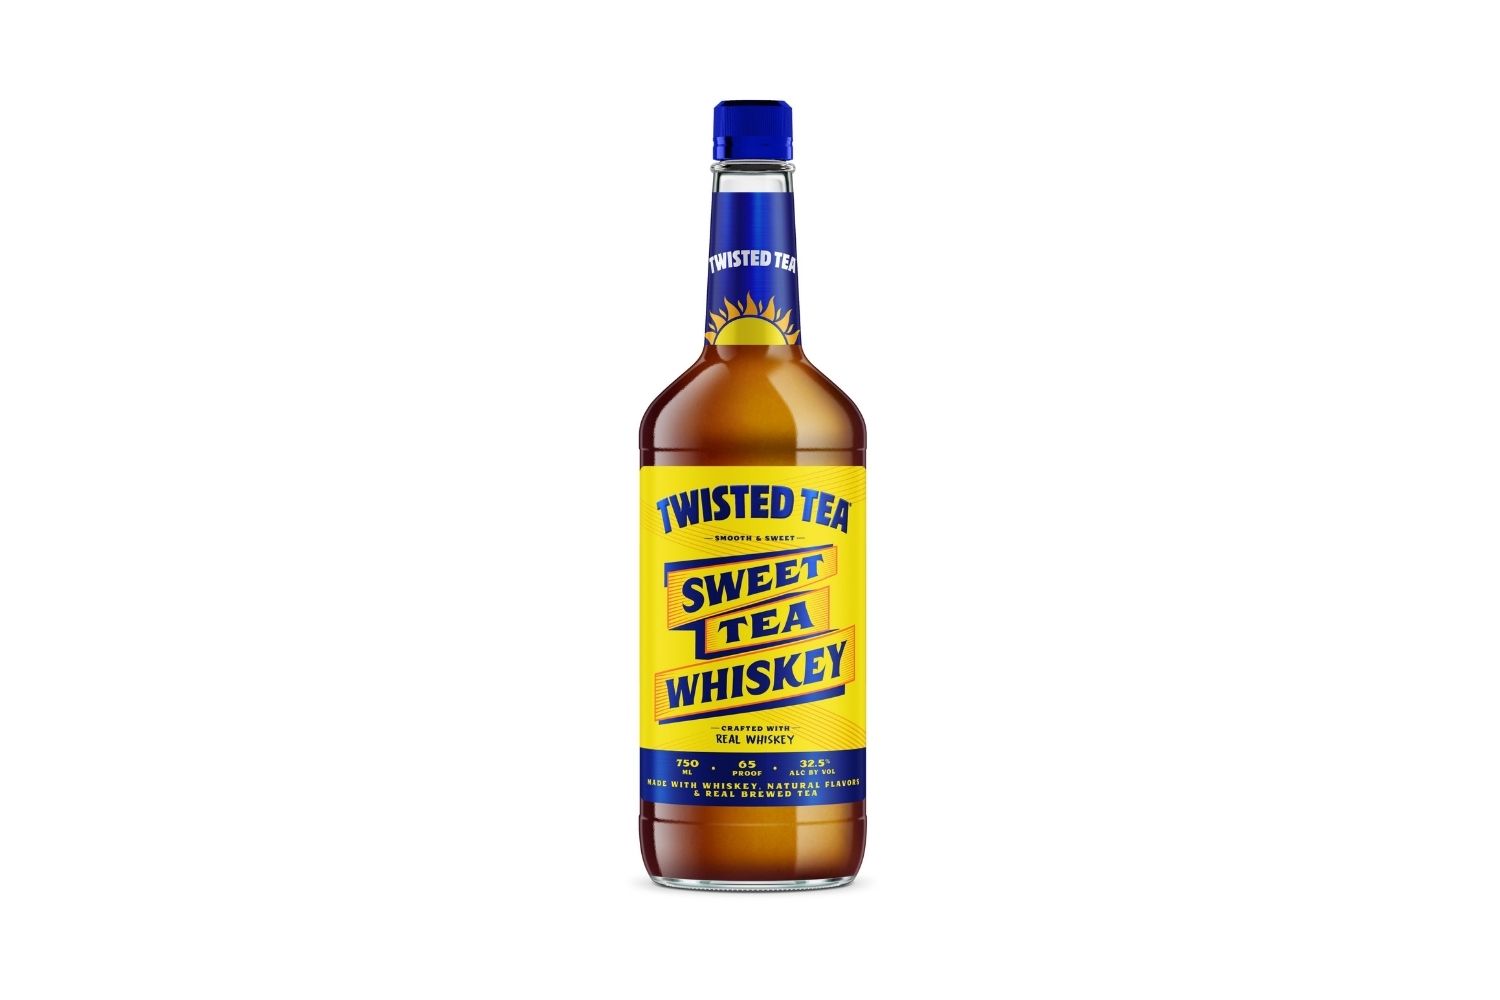 11-enigmatic-facts-about-twisted-tea-whiskey